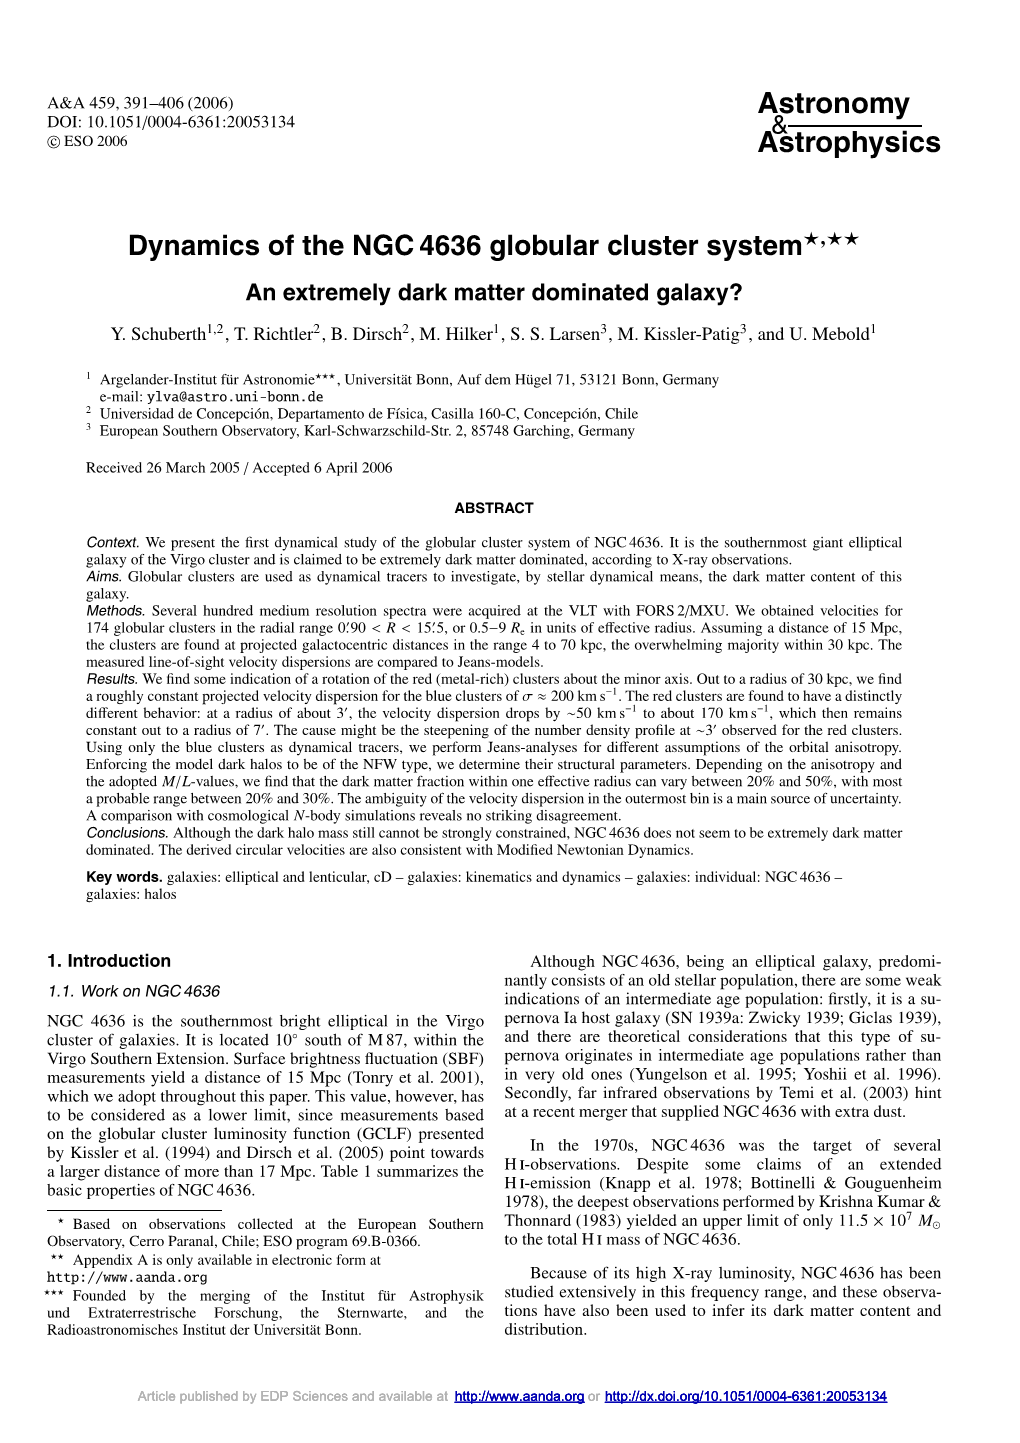 Dynamics of the NGC 4636 Globular Cluster System�,�� an Extremely Dark Matter Dominated Galaxy?